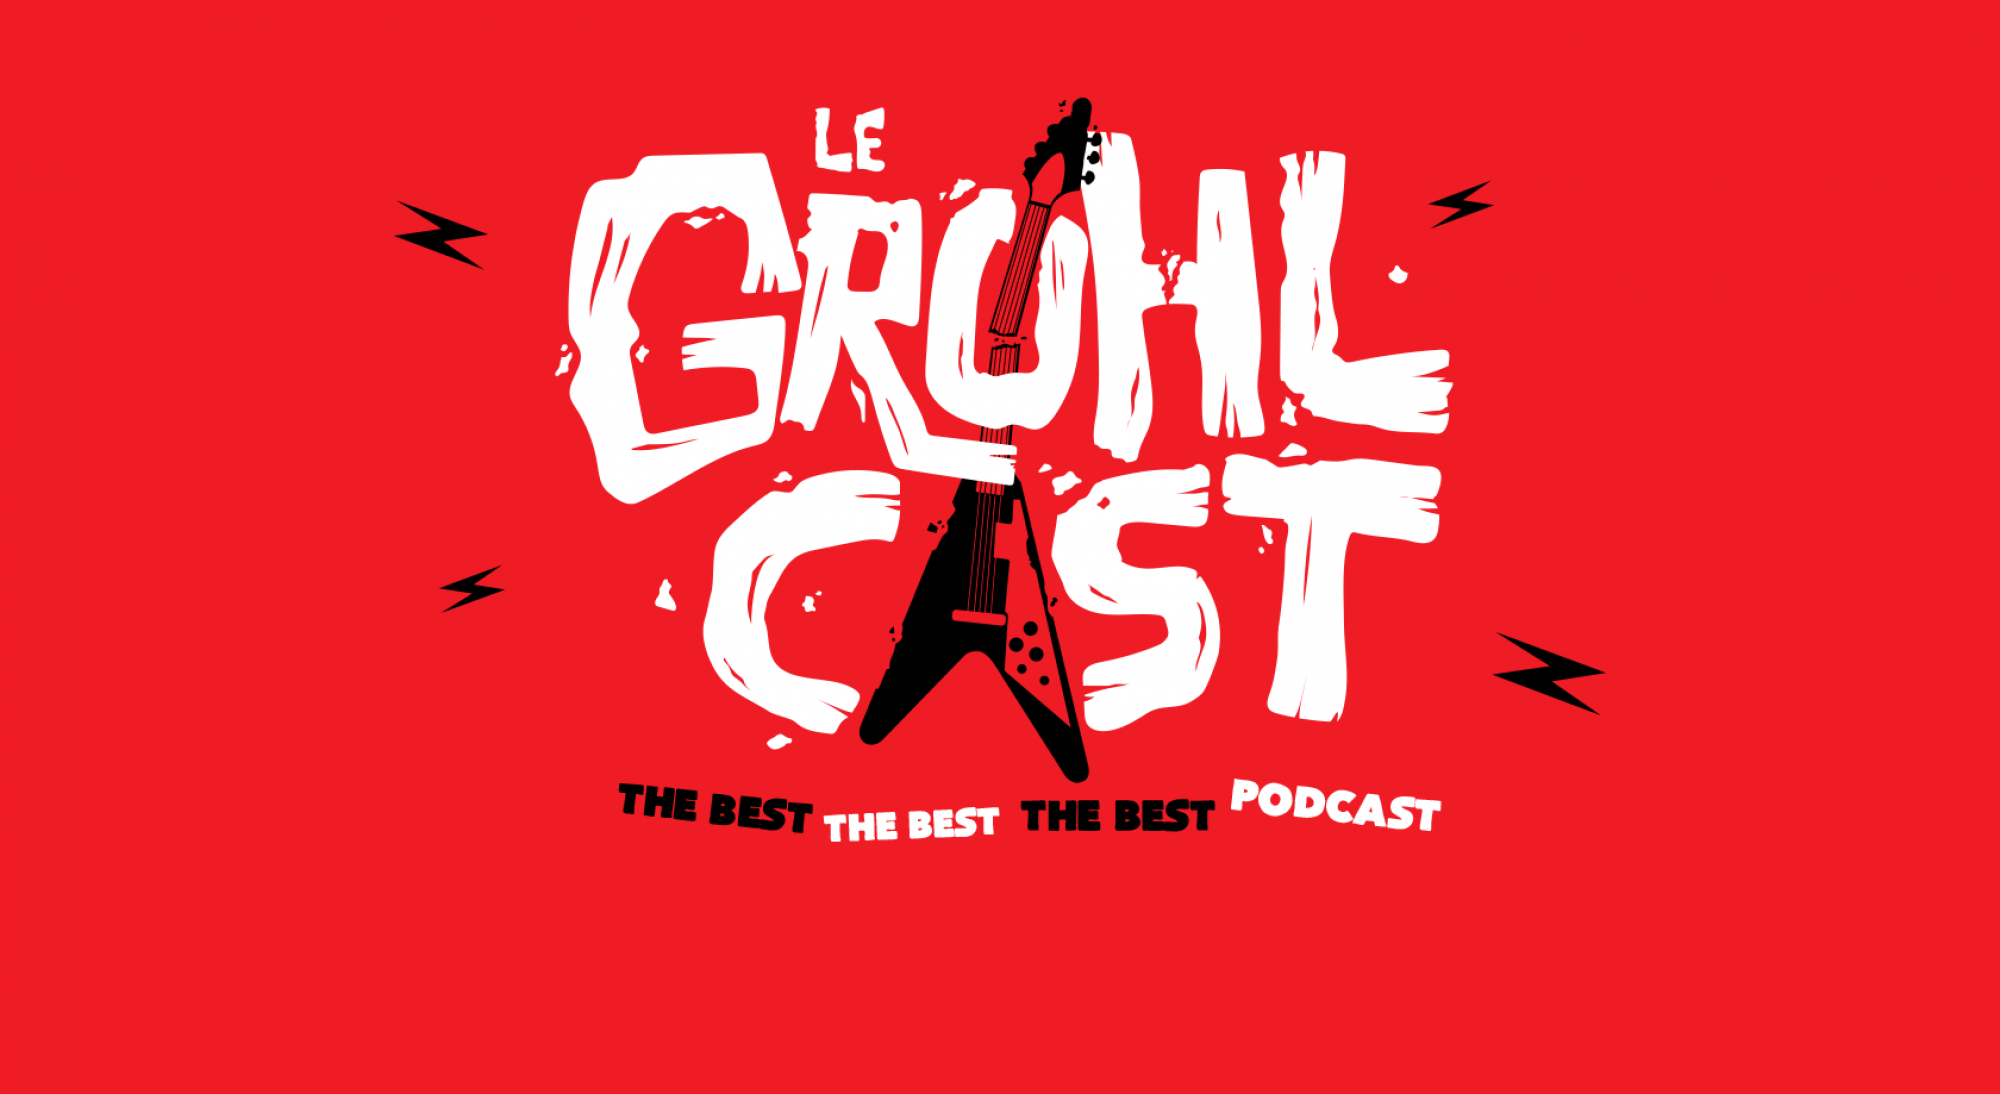 Le Grohlcast